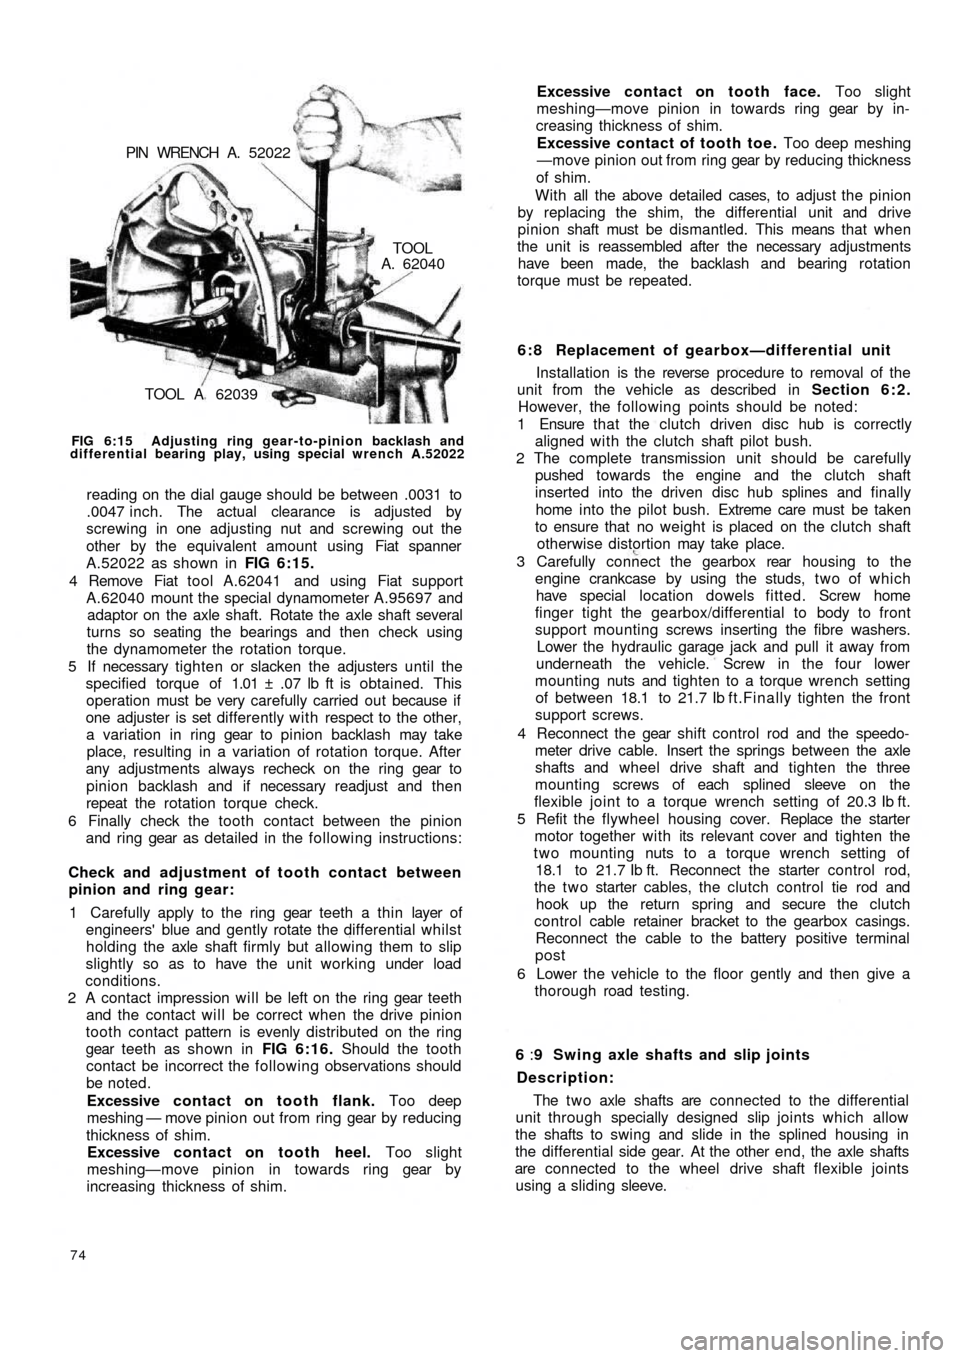 FIAT 500 1967 1.G Workshop Manual TOOL A  62039
TOOLA. 62040 PIN  WRENCH  A.  52022
FIG 6:15  Adjusting ring gear-to-pinion backlash and
differential bearing play, using special wrench A.52022
reading on the dial gauge should be betwe